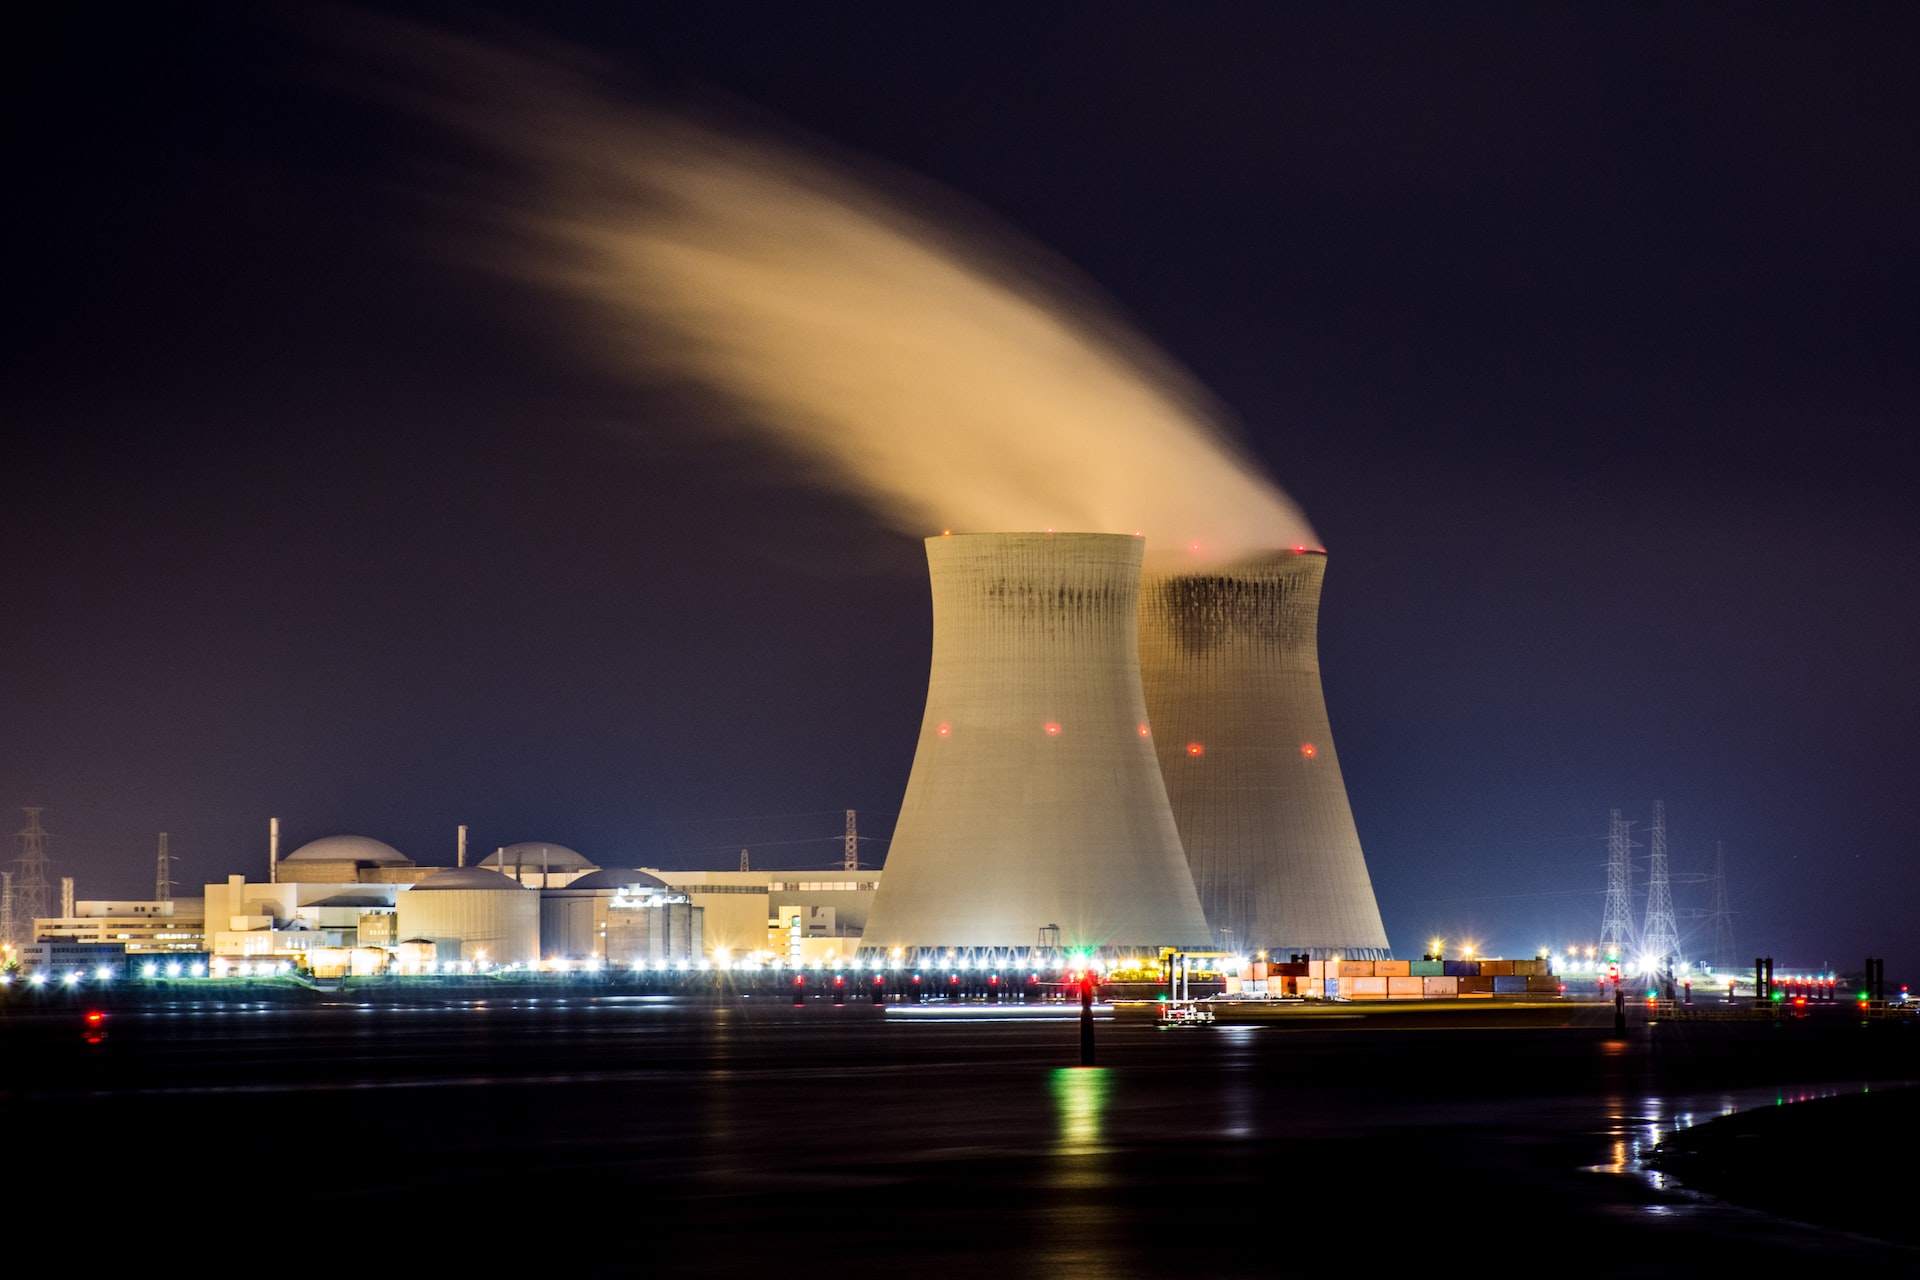 The Doel Nuclear Power Station at night in Antwerp, Belgium 